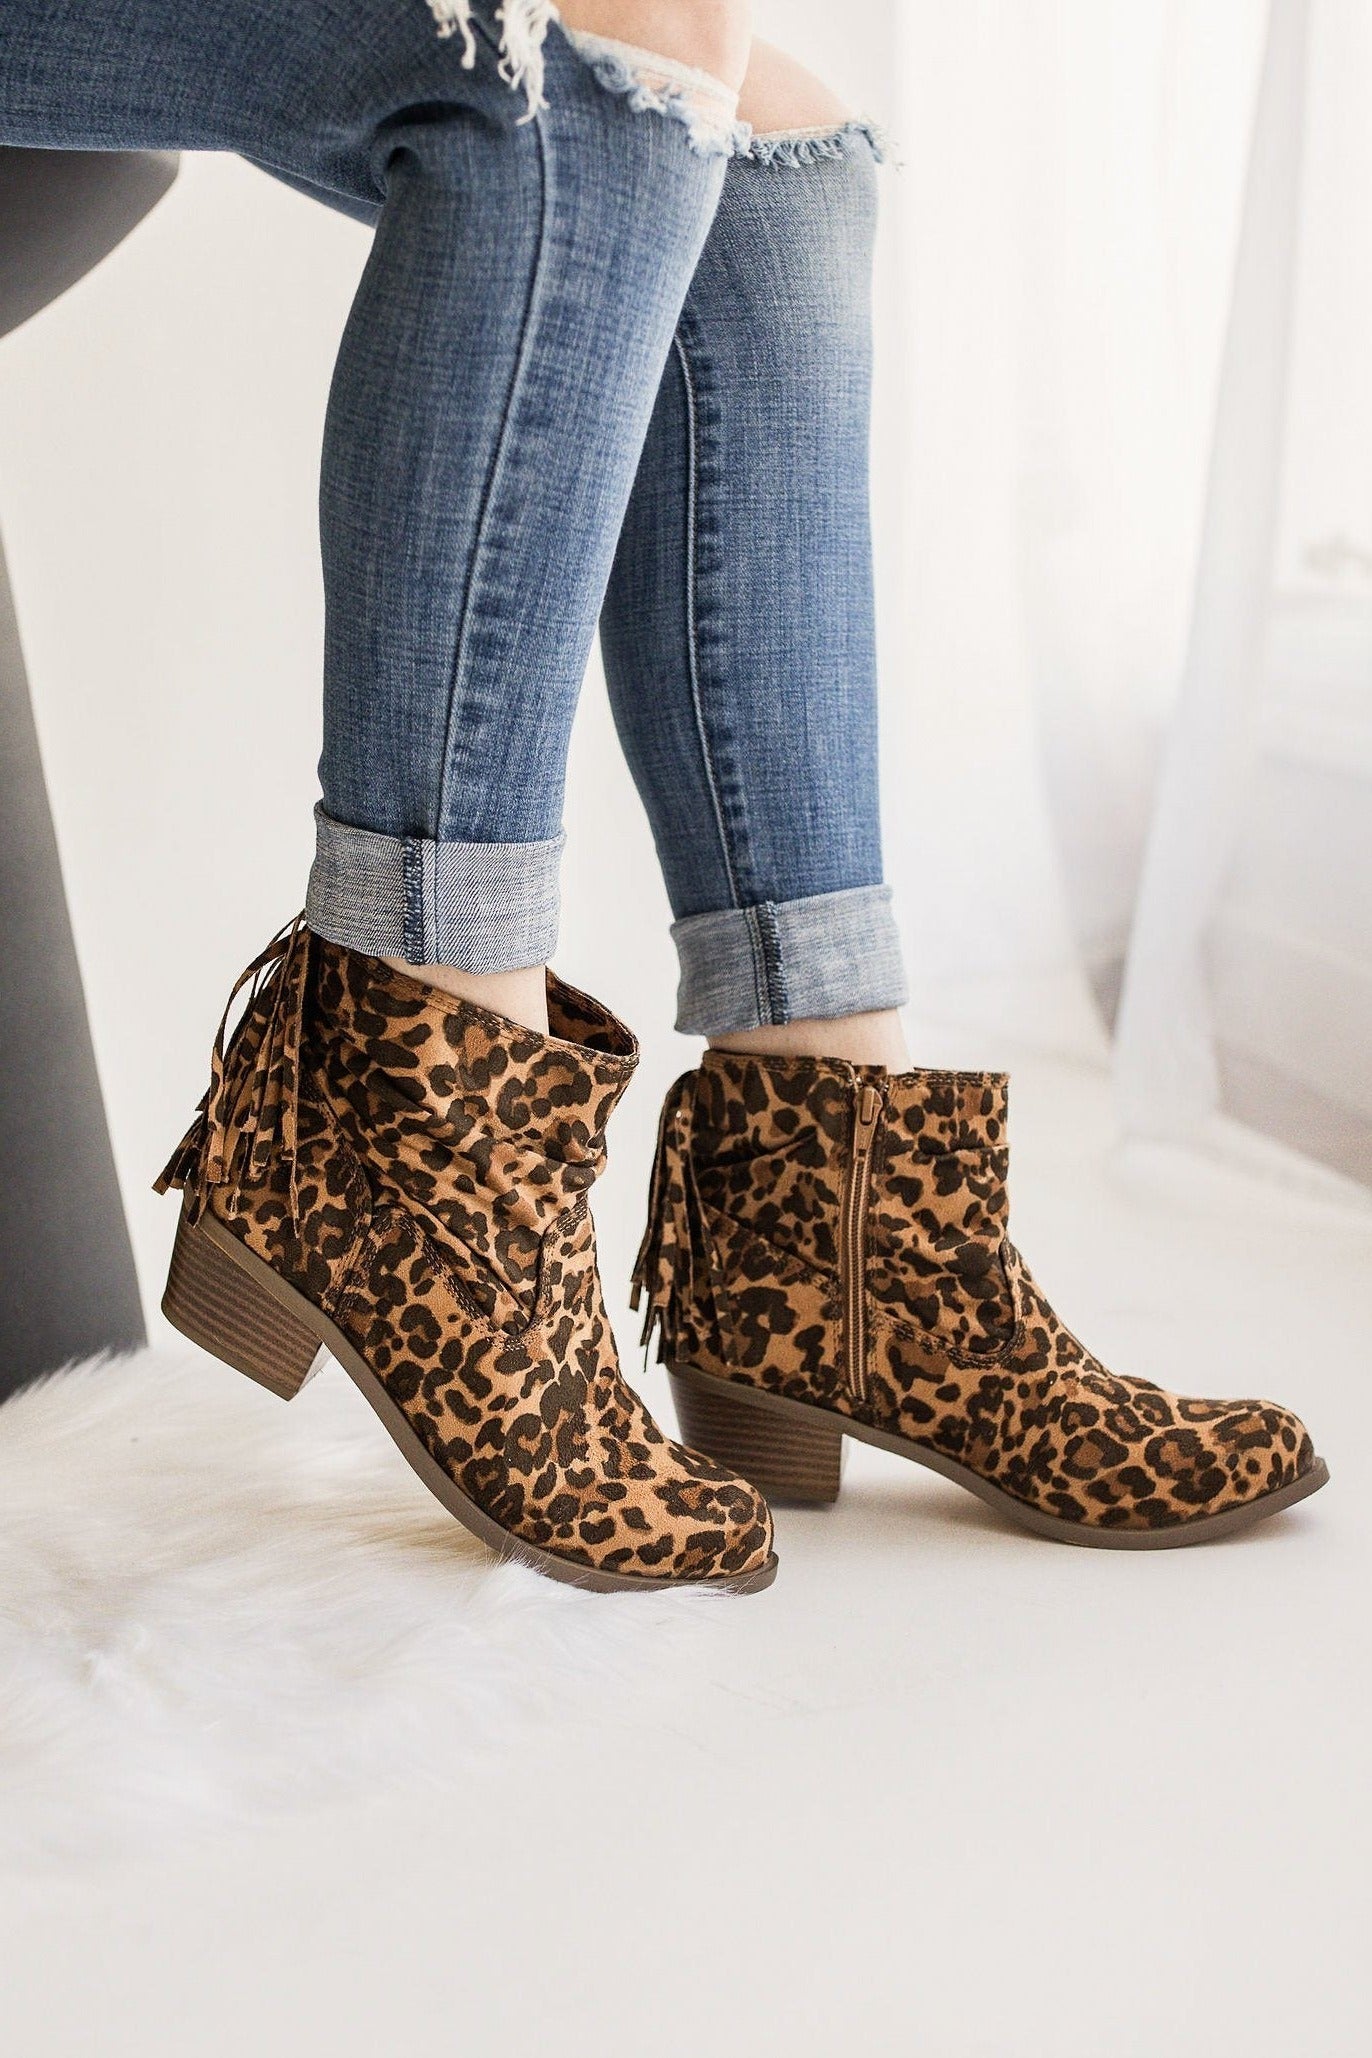 Not Rated Veronica Bootie in Leopard - cantonclothingcompany